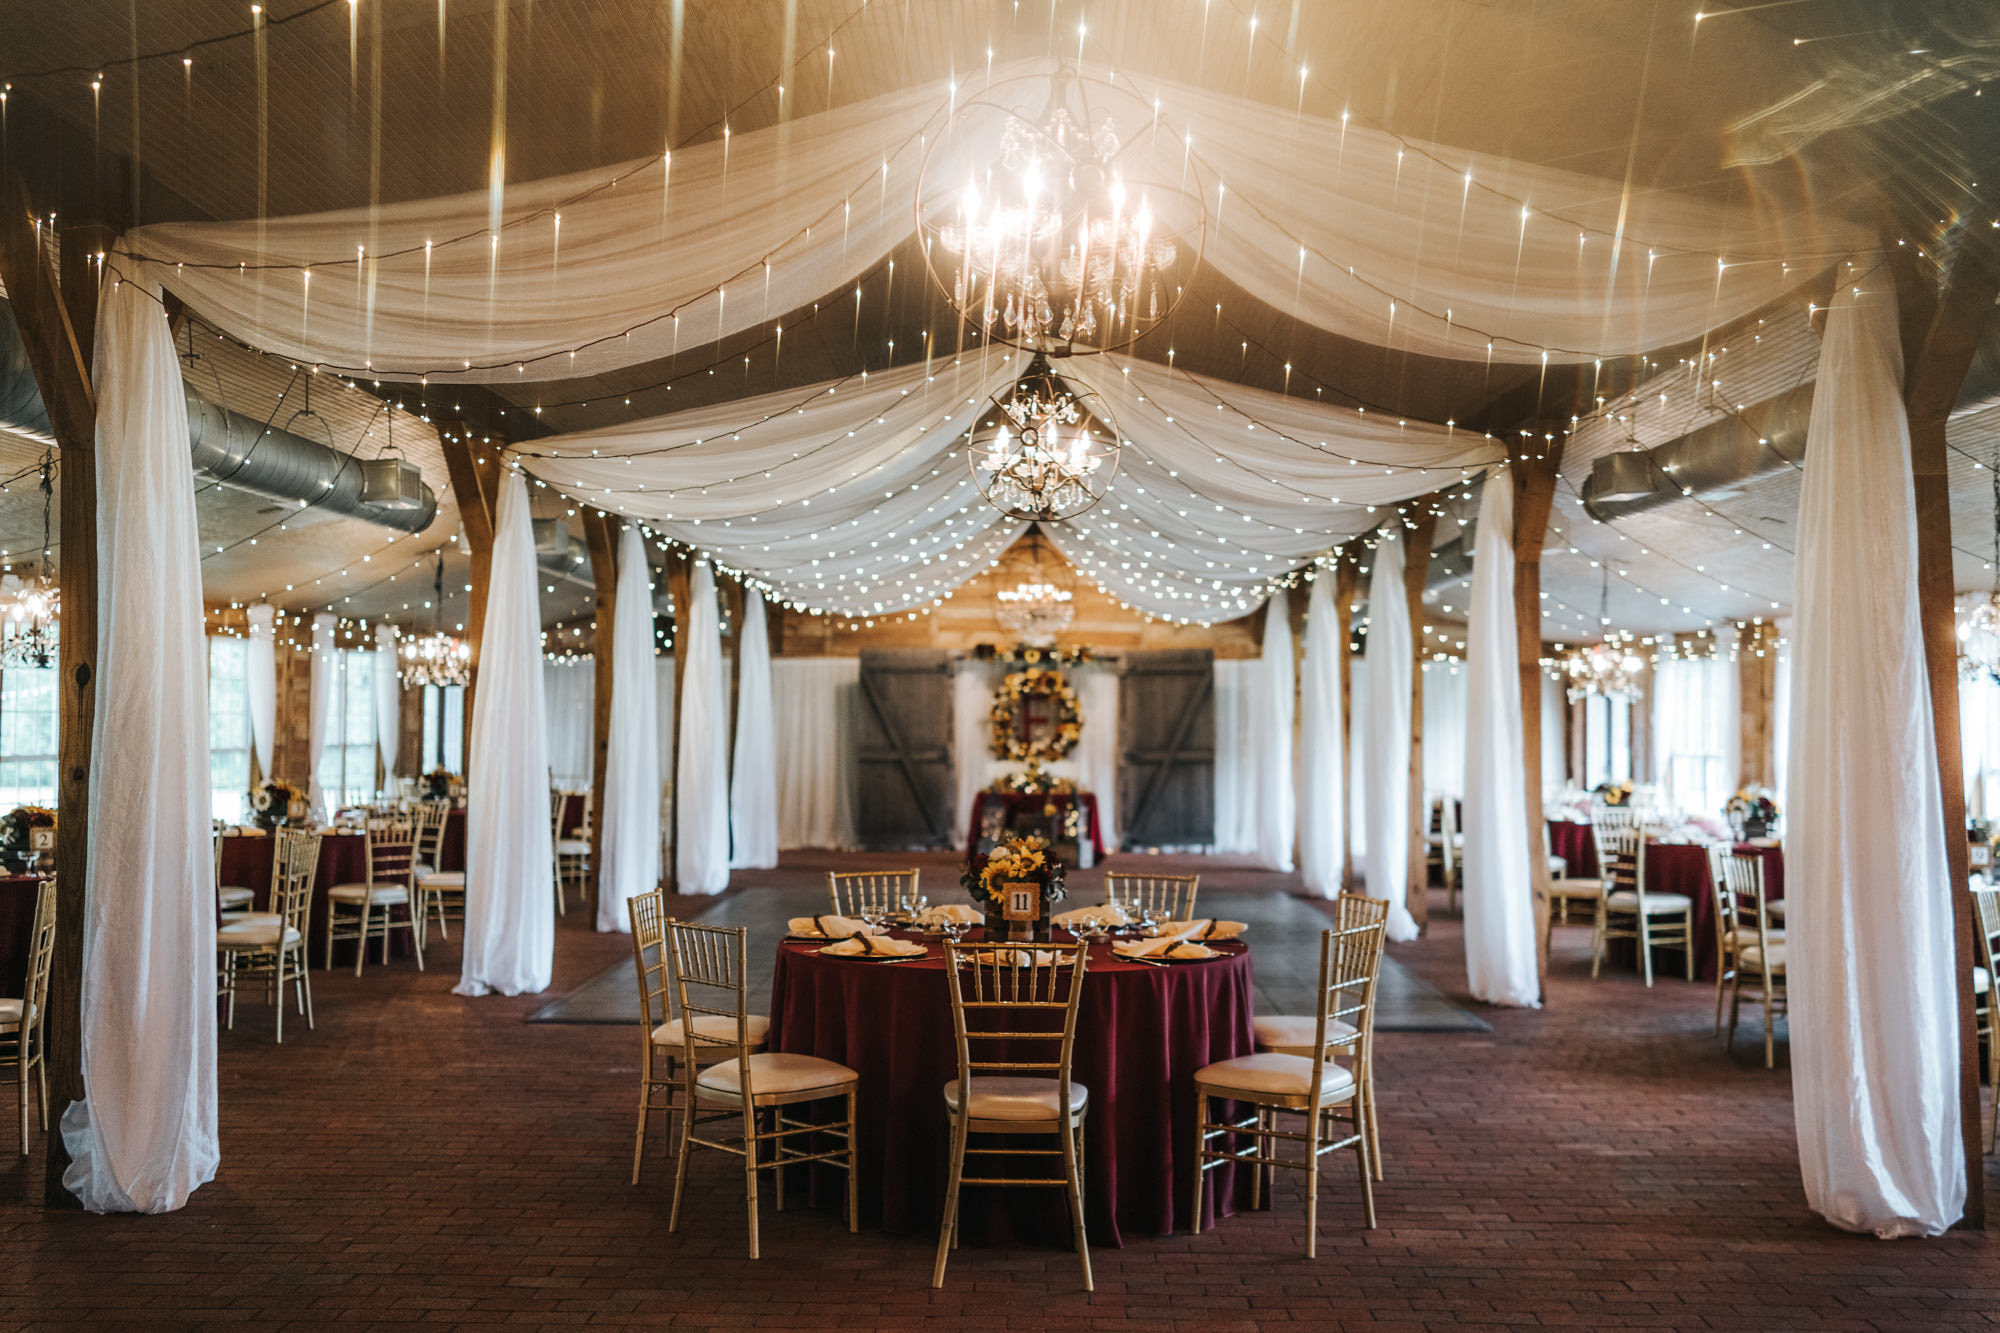 Rustic Dover Burgundy and Yellow Sunflower Wedding Barn Reception with String Lights and Ceiling Draping | Round Reception Tables with Burgundy Maroon Red Linen Table Cloths and Gold Chiavari Chairs